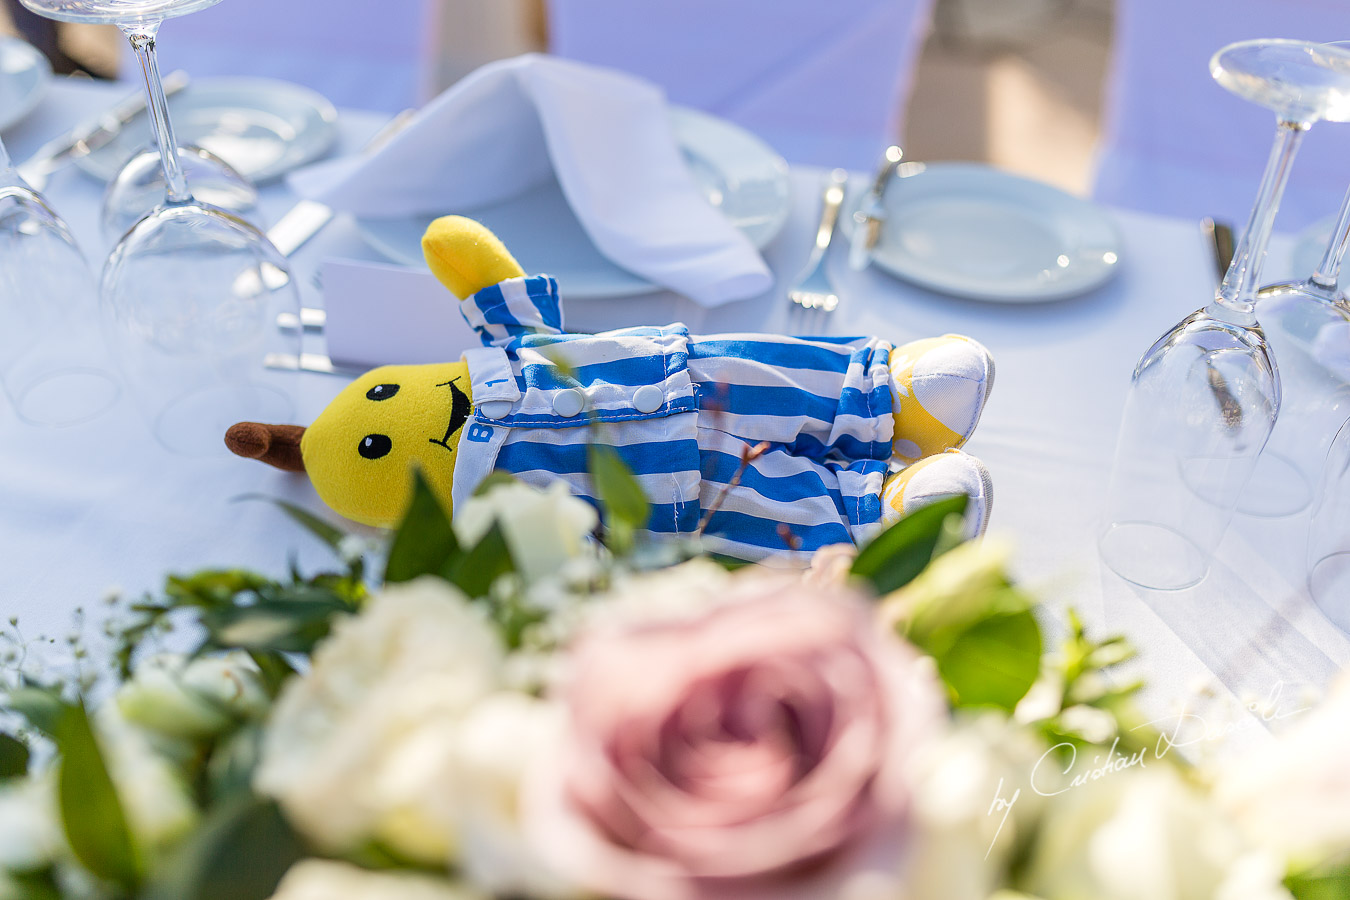 Unique wedding table decorations captured by Cristian Dascalu at a wedding at The Aphrodite Hills Resort in Paphos, Cyprus.